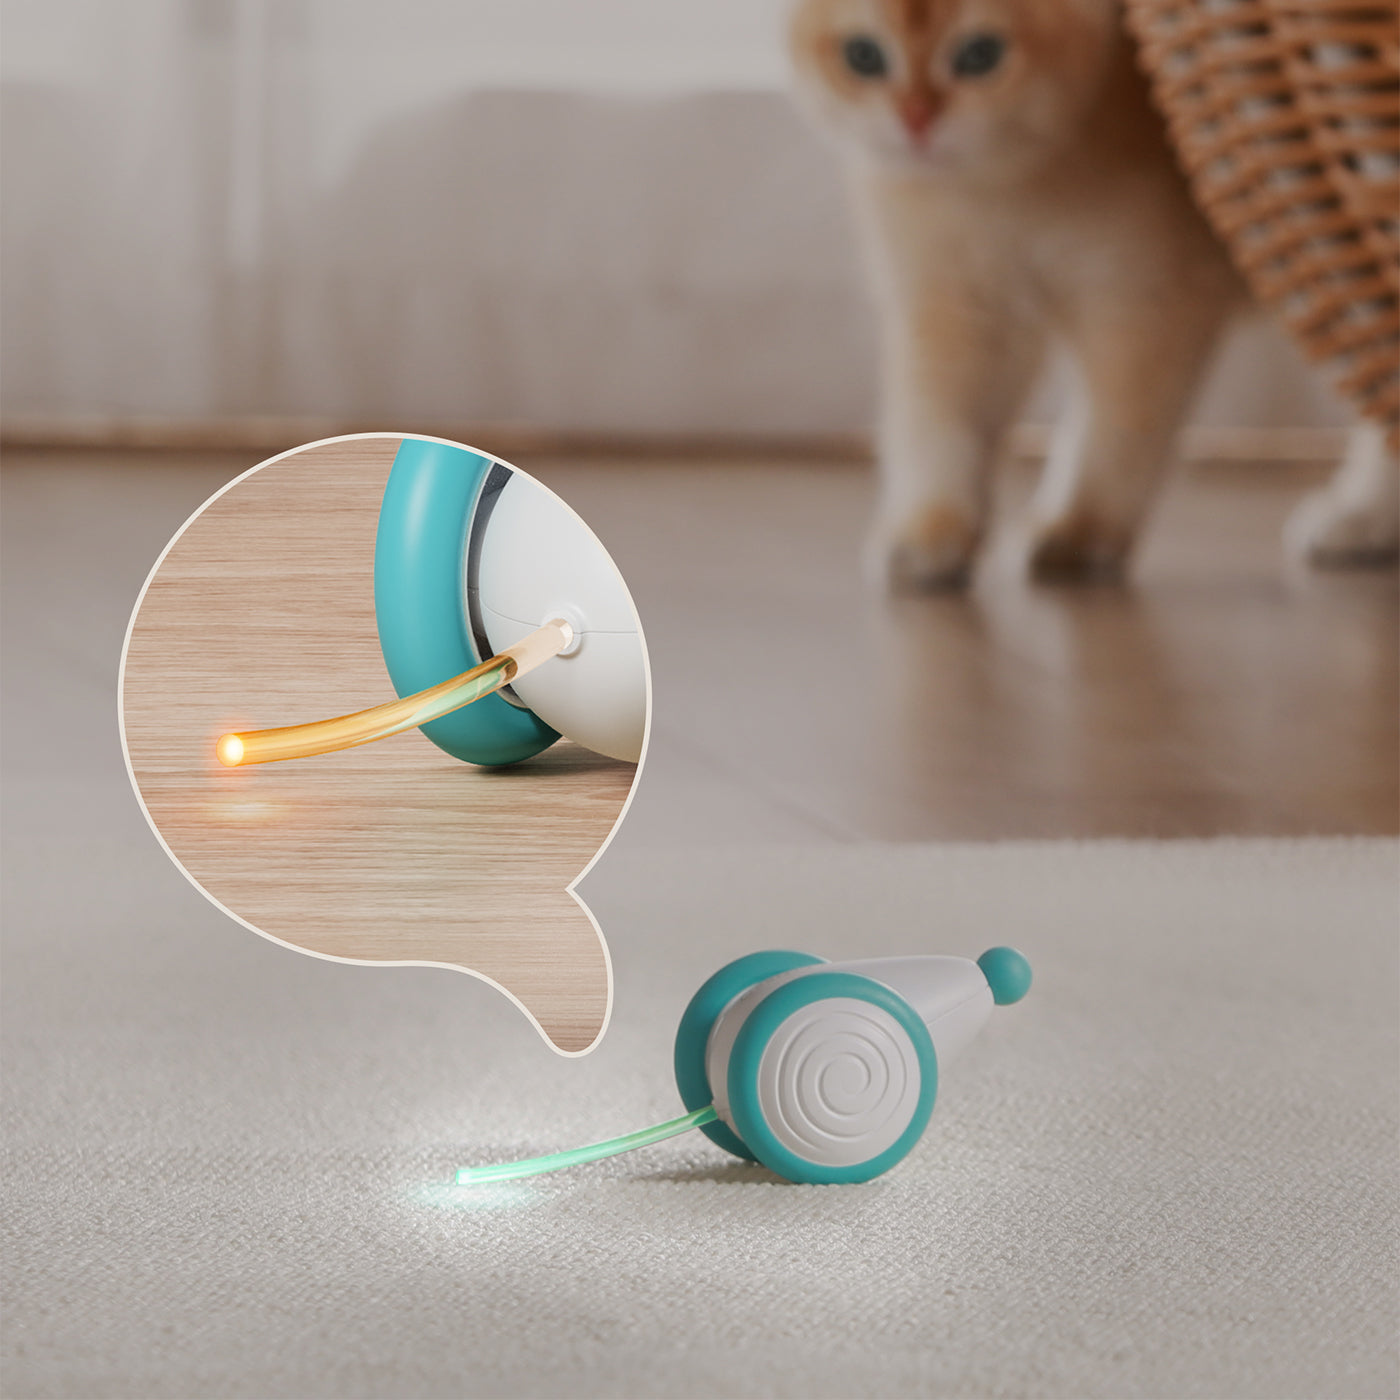 Petlibro Pixie Mouse Interactive Cat Toy